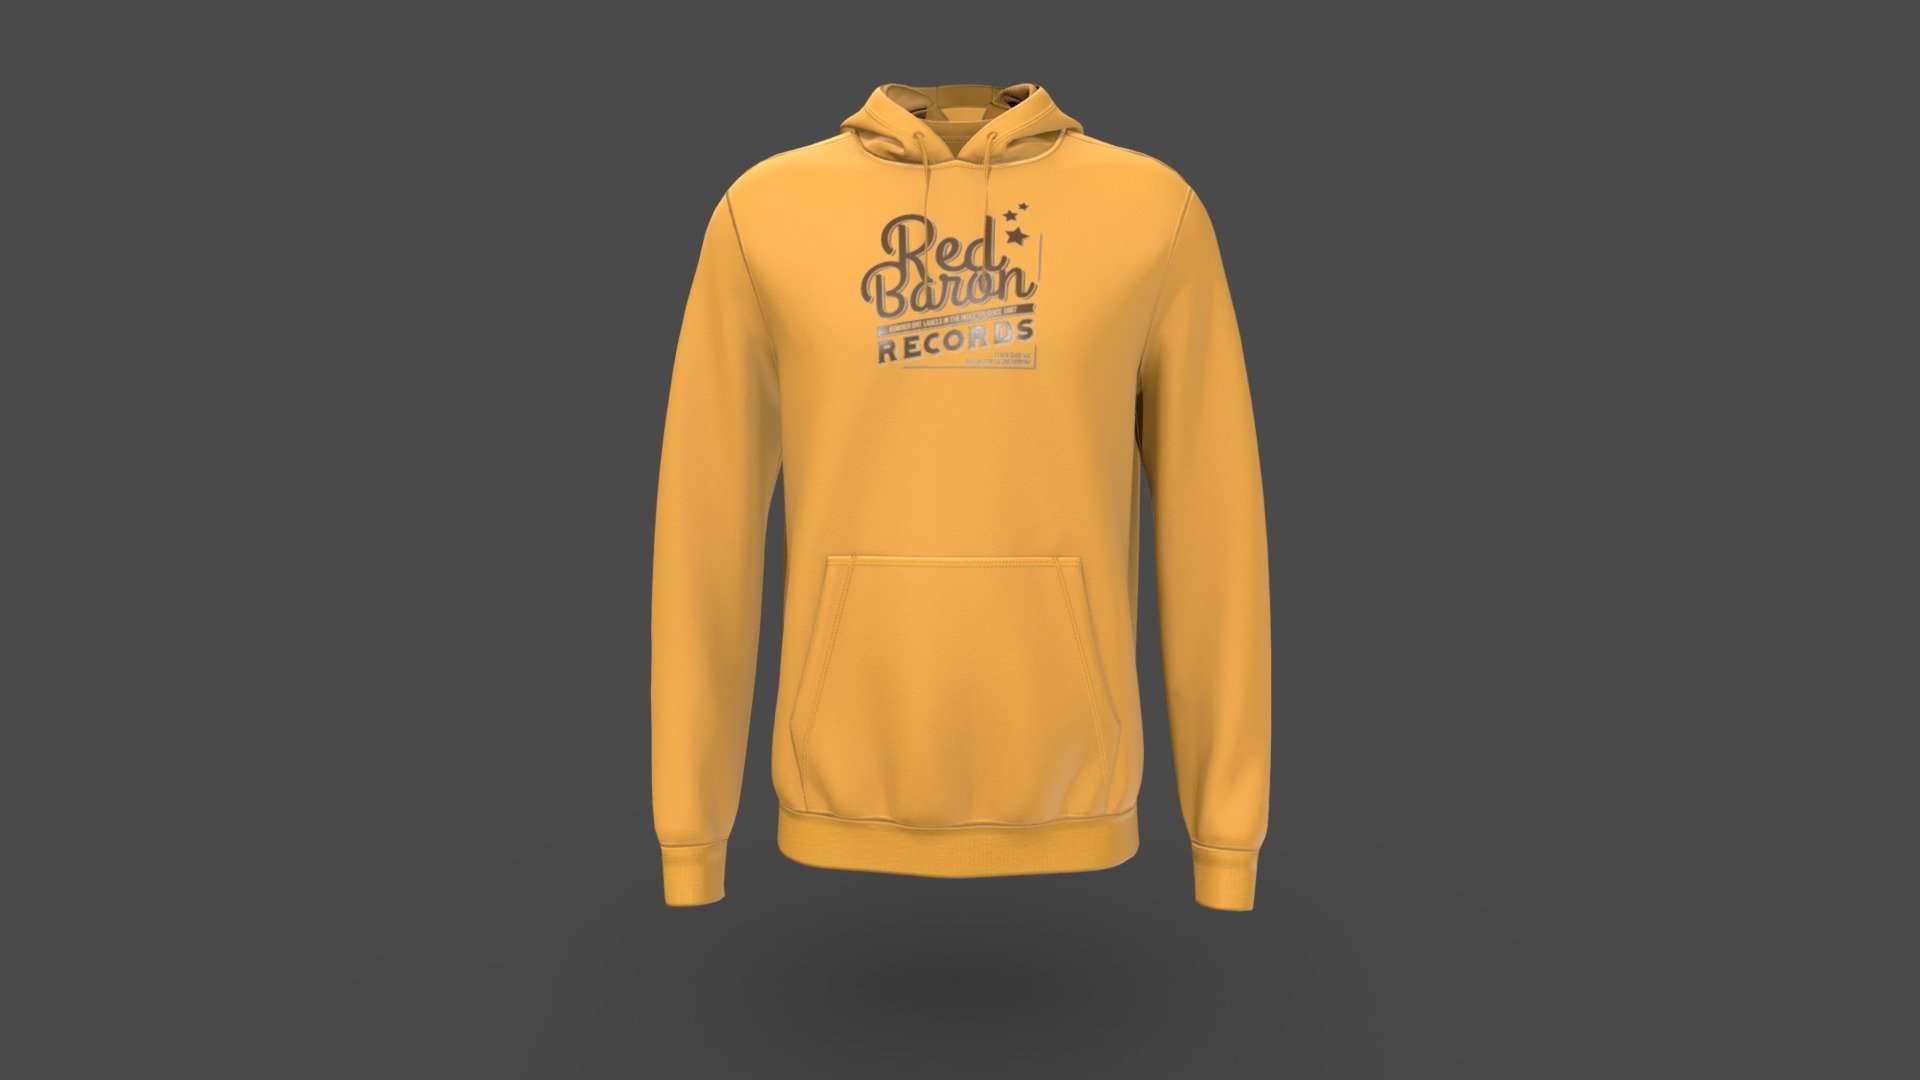 Men Chest Printed Hoodie
Version V1.0

Realistic high detailed Men Hood with high resolution textures. Model created by our unique processing &amp; Optimized for 3D web and AR / VR

Features

Optimized &amp; NON-Optimized obj model with 4K texture included




Optimized for AR/VR/MR

4K &amp; 2K fabric texture and print details

Optimized model is 848KB

NON-Optimized model is 19.9MB 

Knit fabric texture and print details included

GLB file in 2k texture size is 2.78MB

GLB file in 4k texture size is 14.2MB (Game &amp; Animation Ready)

Suitable for web application configurator development.

Fully unwrap UV

The model has 1 material

Includes high detailed normal map

Unit measurement was inch

Triangular Mesh with 7.8k Vertices

Texture map: Base color, OcclusionRoughnessMetallic(ORM), Normal

Tpose  available on request

For more details or custom order send email: hello@binarycloth.com


Website:binarycloth.com - Men Chest Printed Hoodie - Buy Royalty Free 3D model by BINARYCLOTH (@binaryclothofficial) 3d model